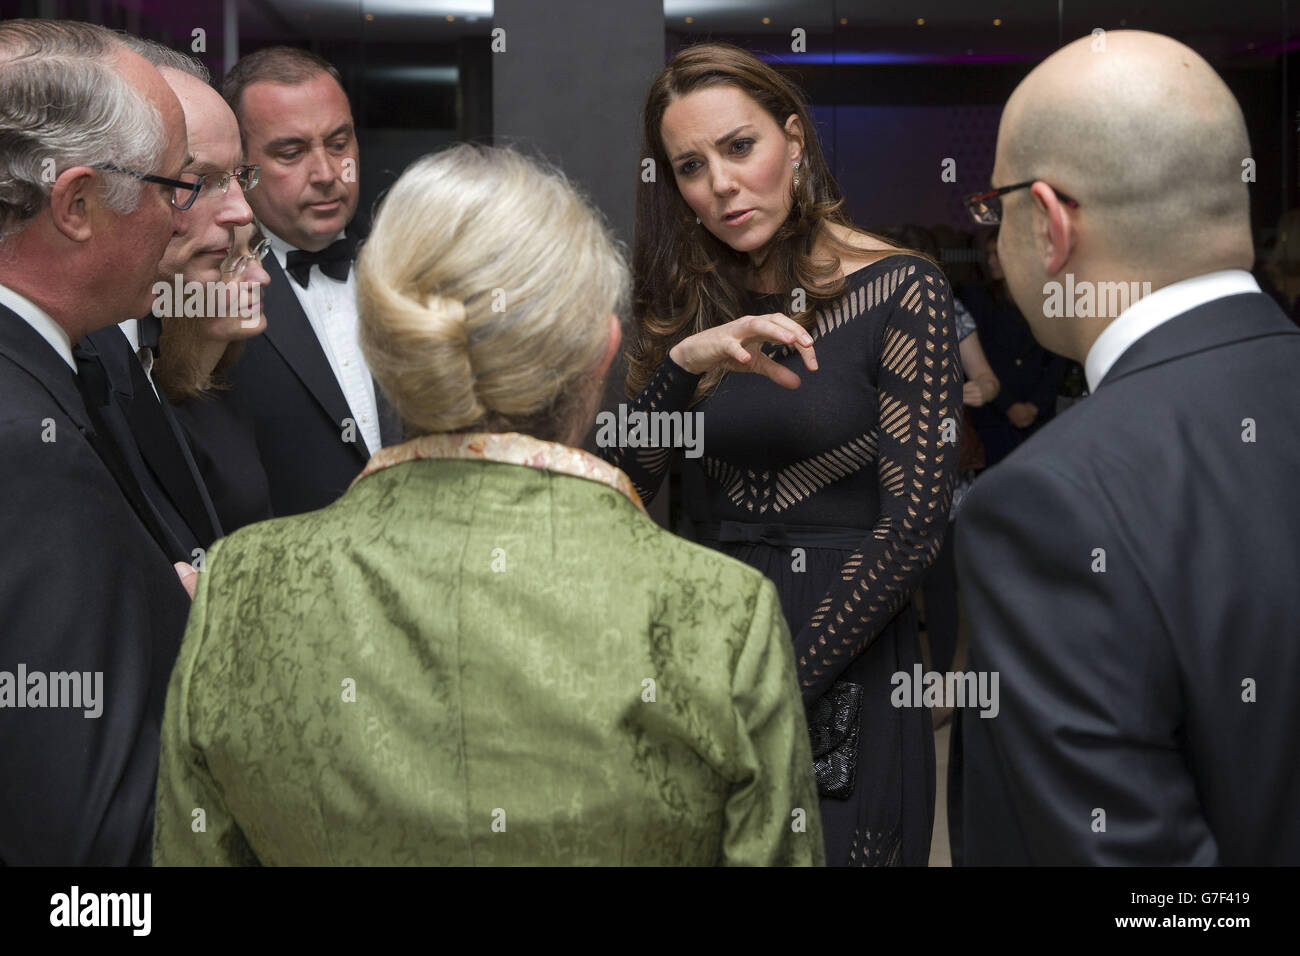 The Duchess of Cambridge (second right) greets supporters as she attends an Autumn Gala evening in support of Action on Addiction. Stock Photo